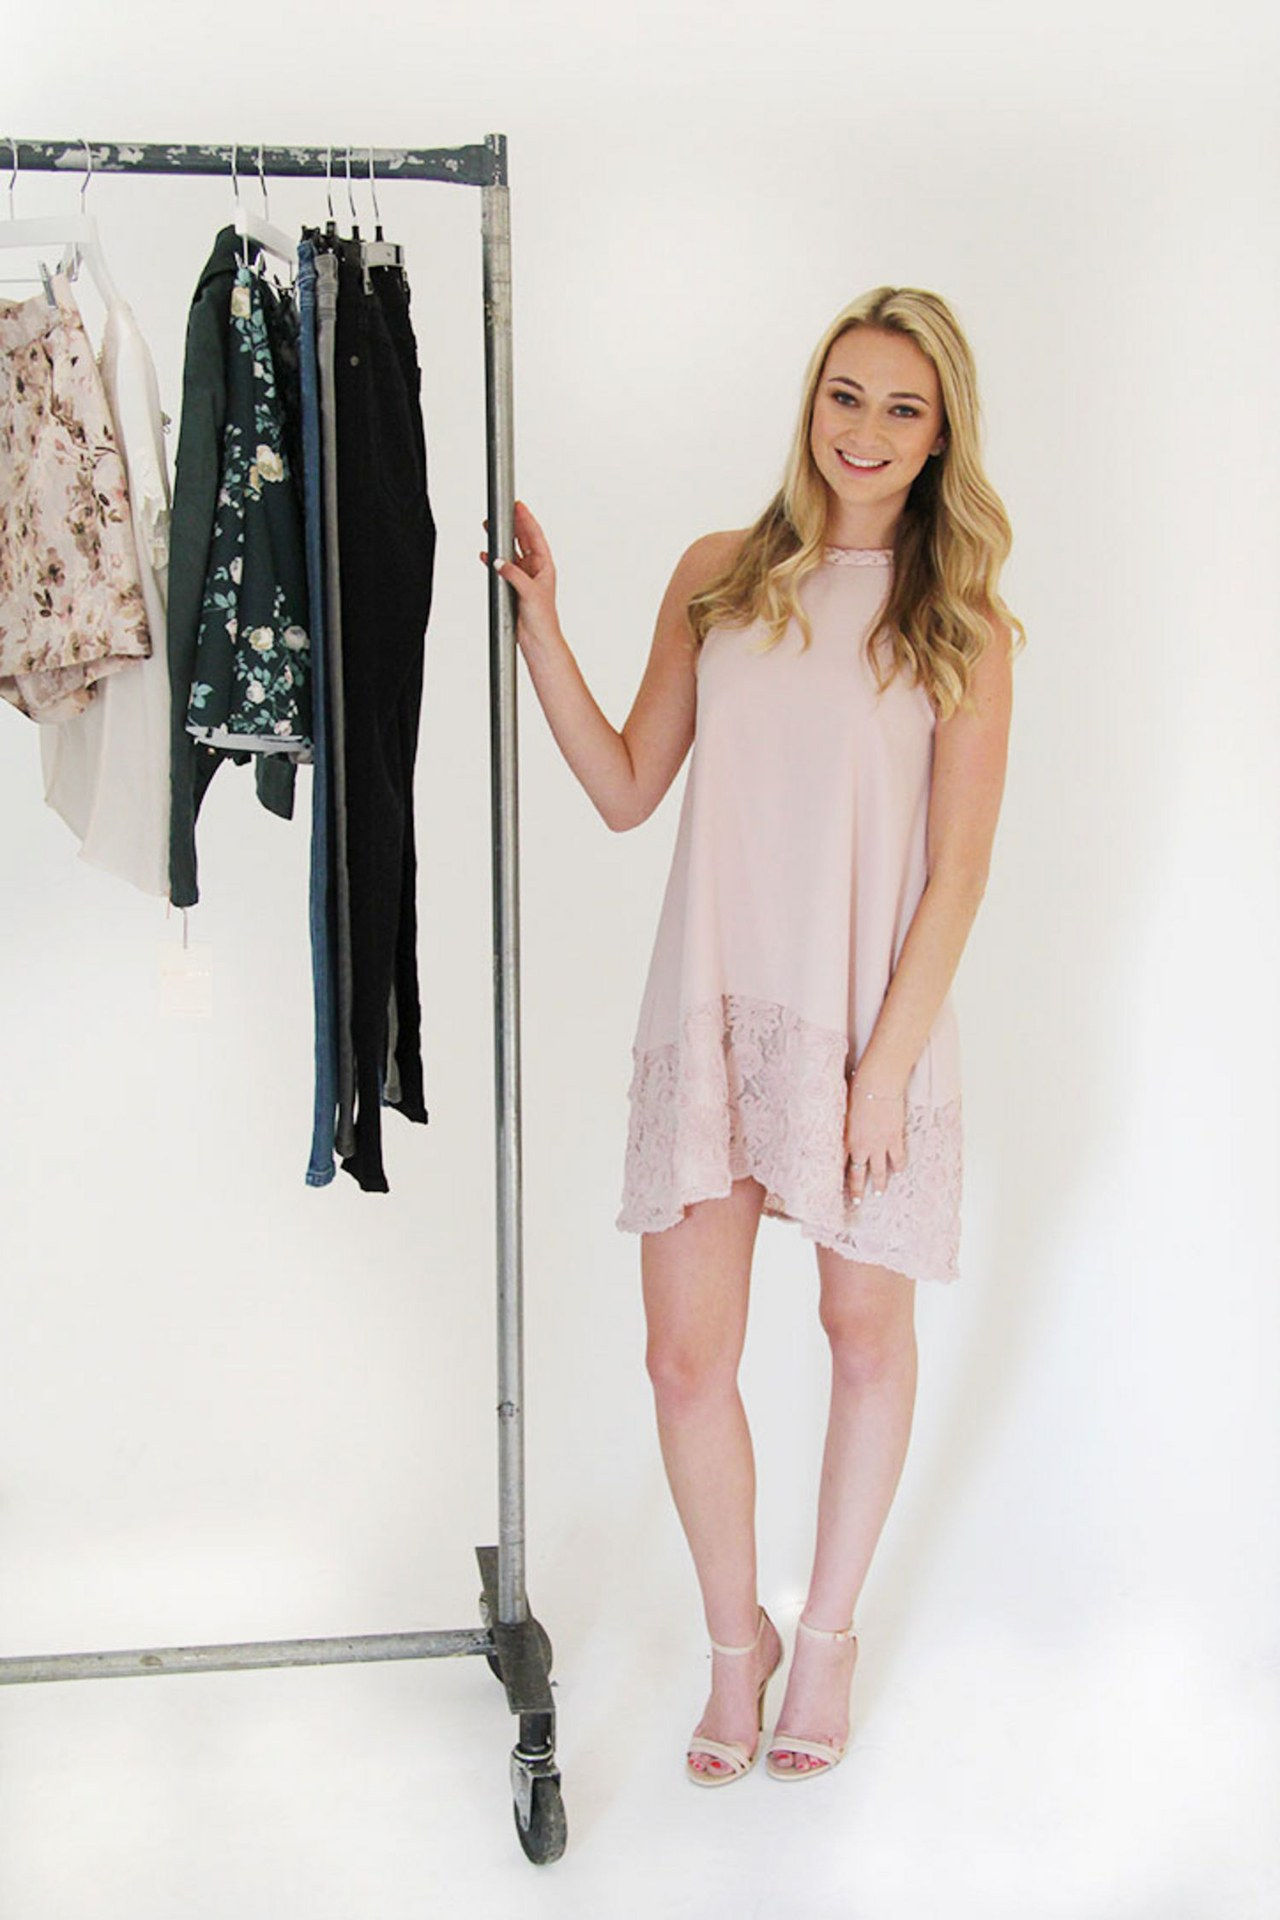 lauren conrad styled date night outfit